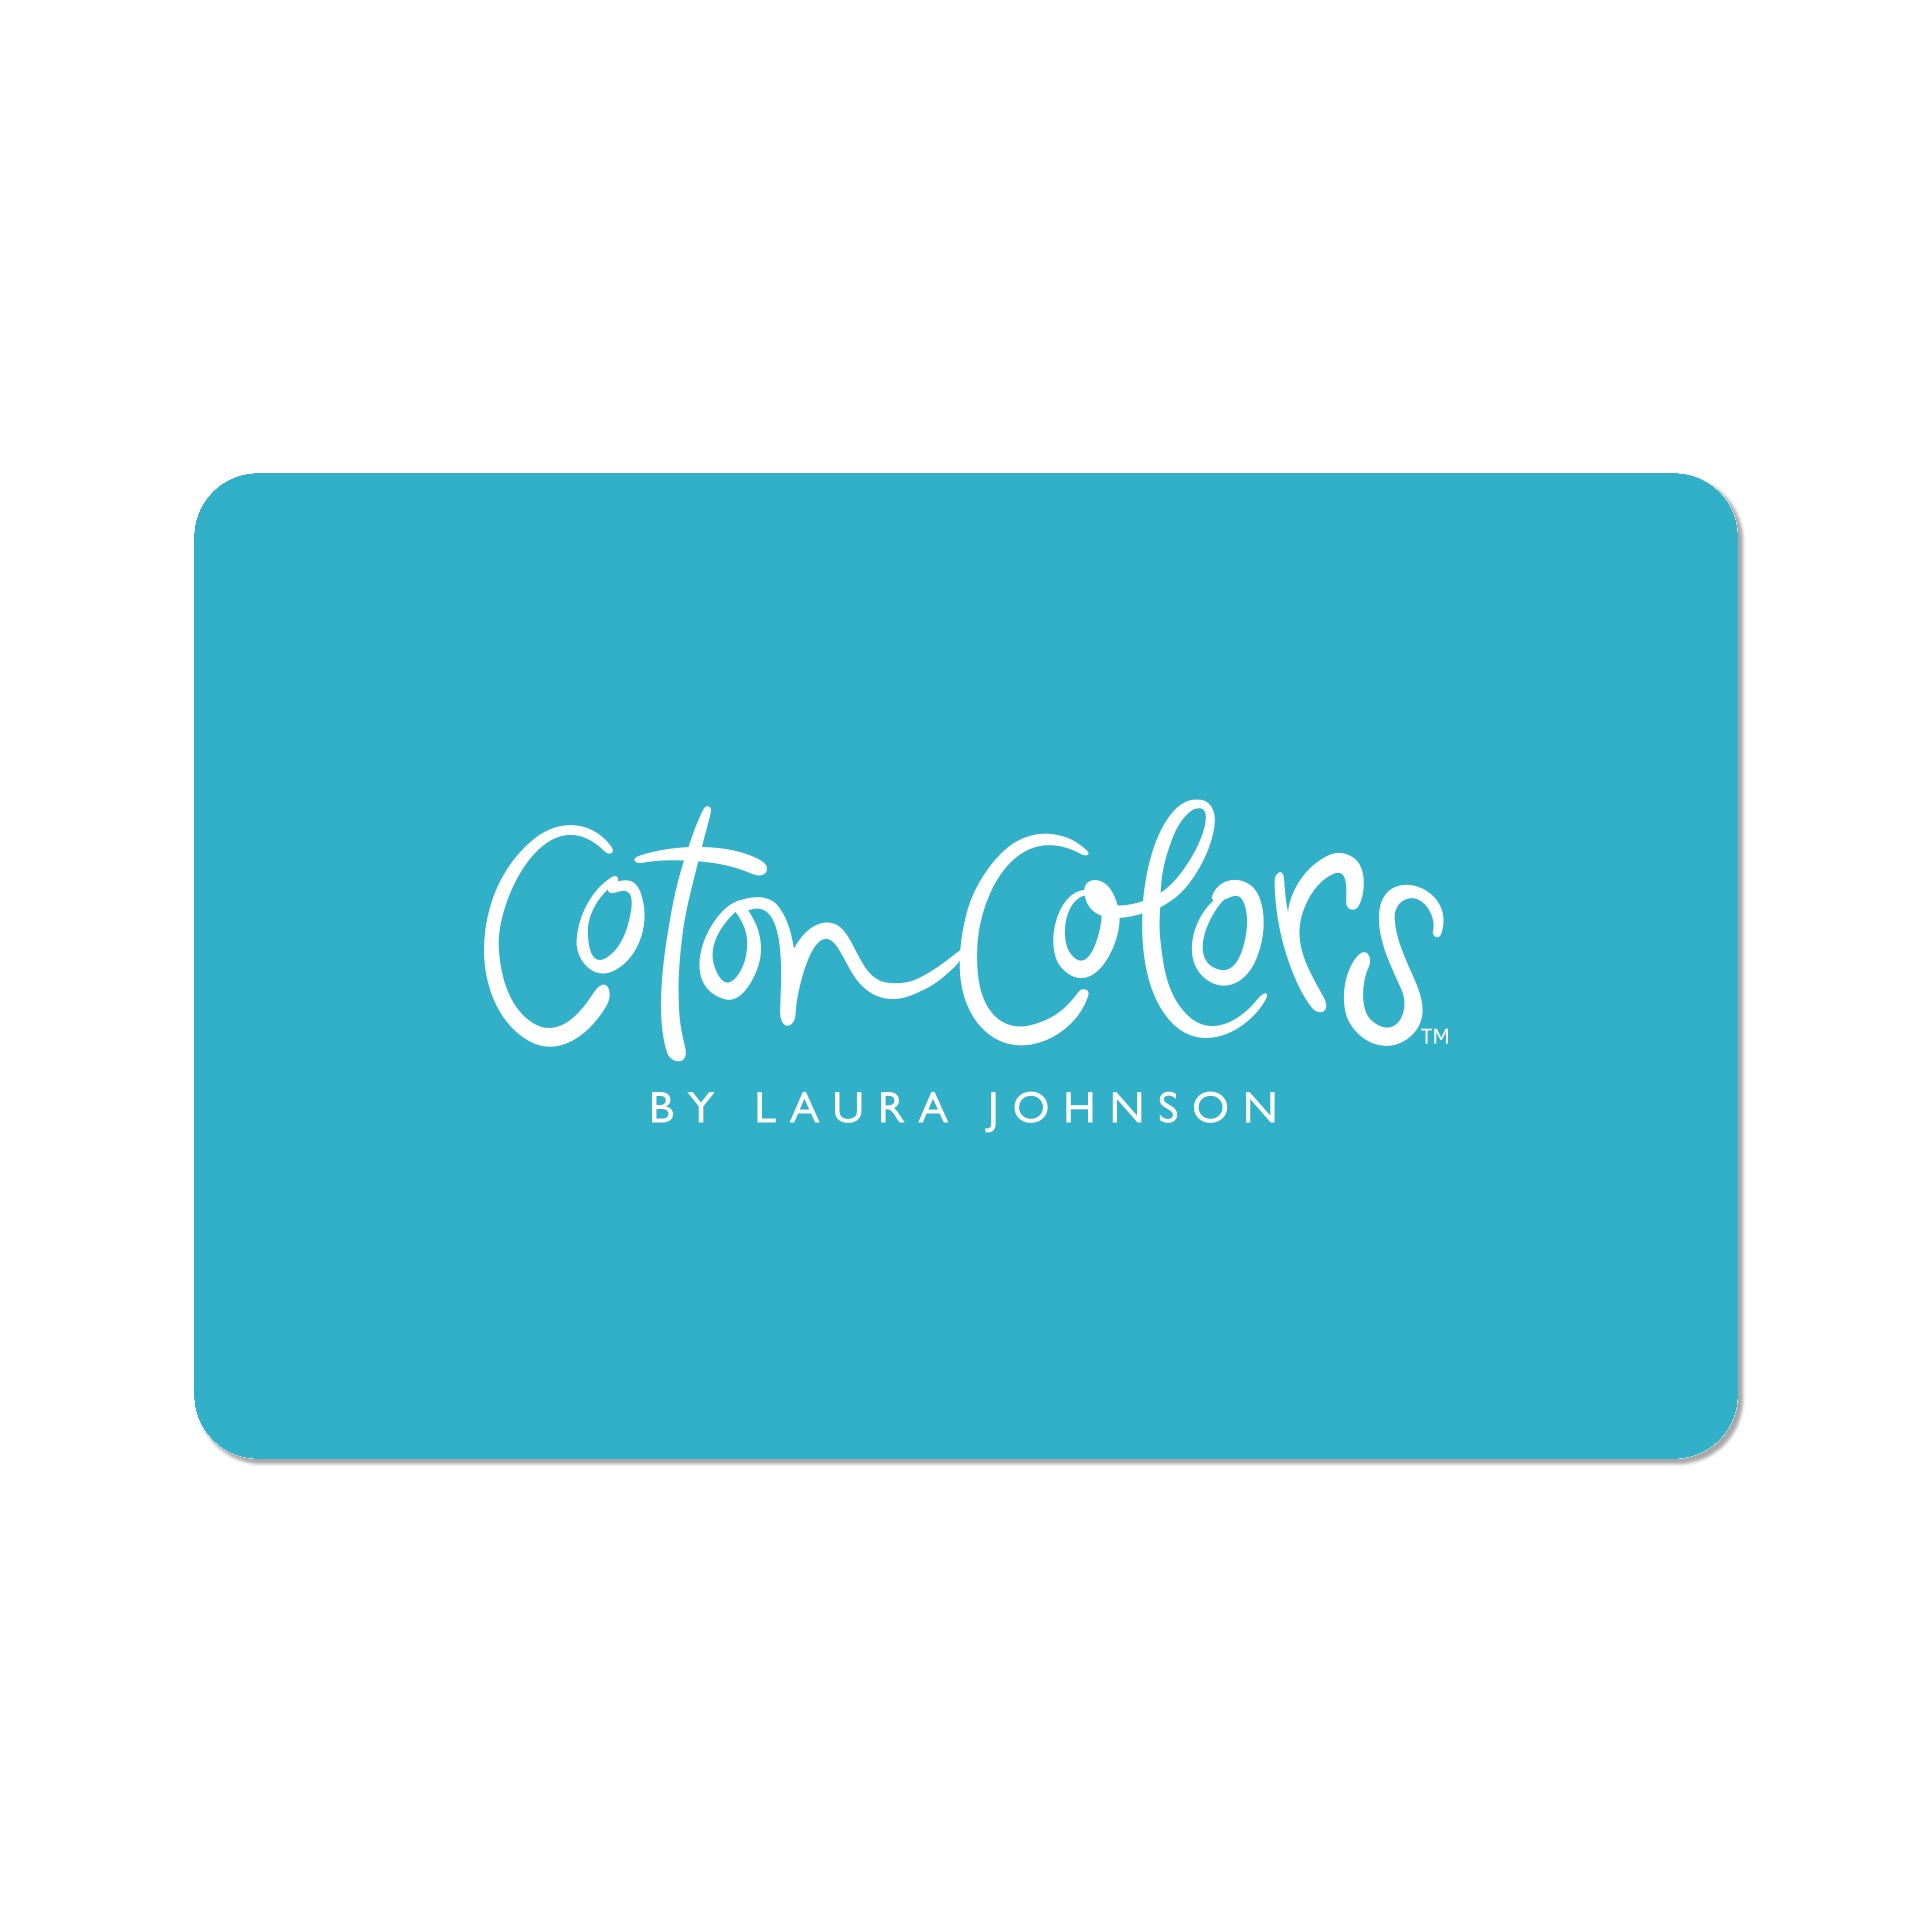 Front View of Coton Colors Gift Card